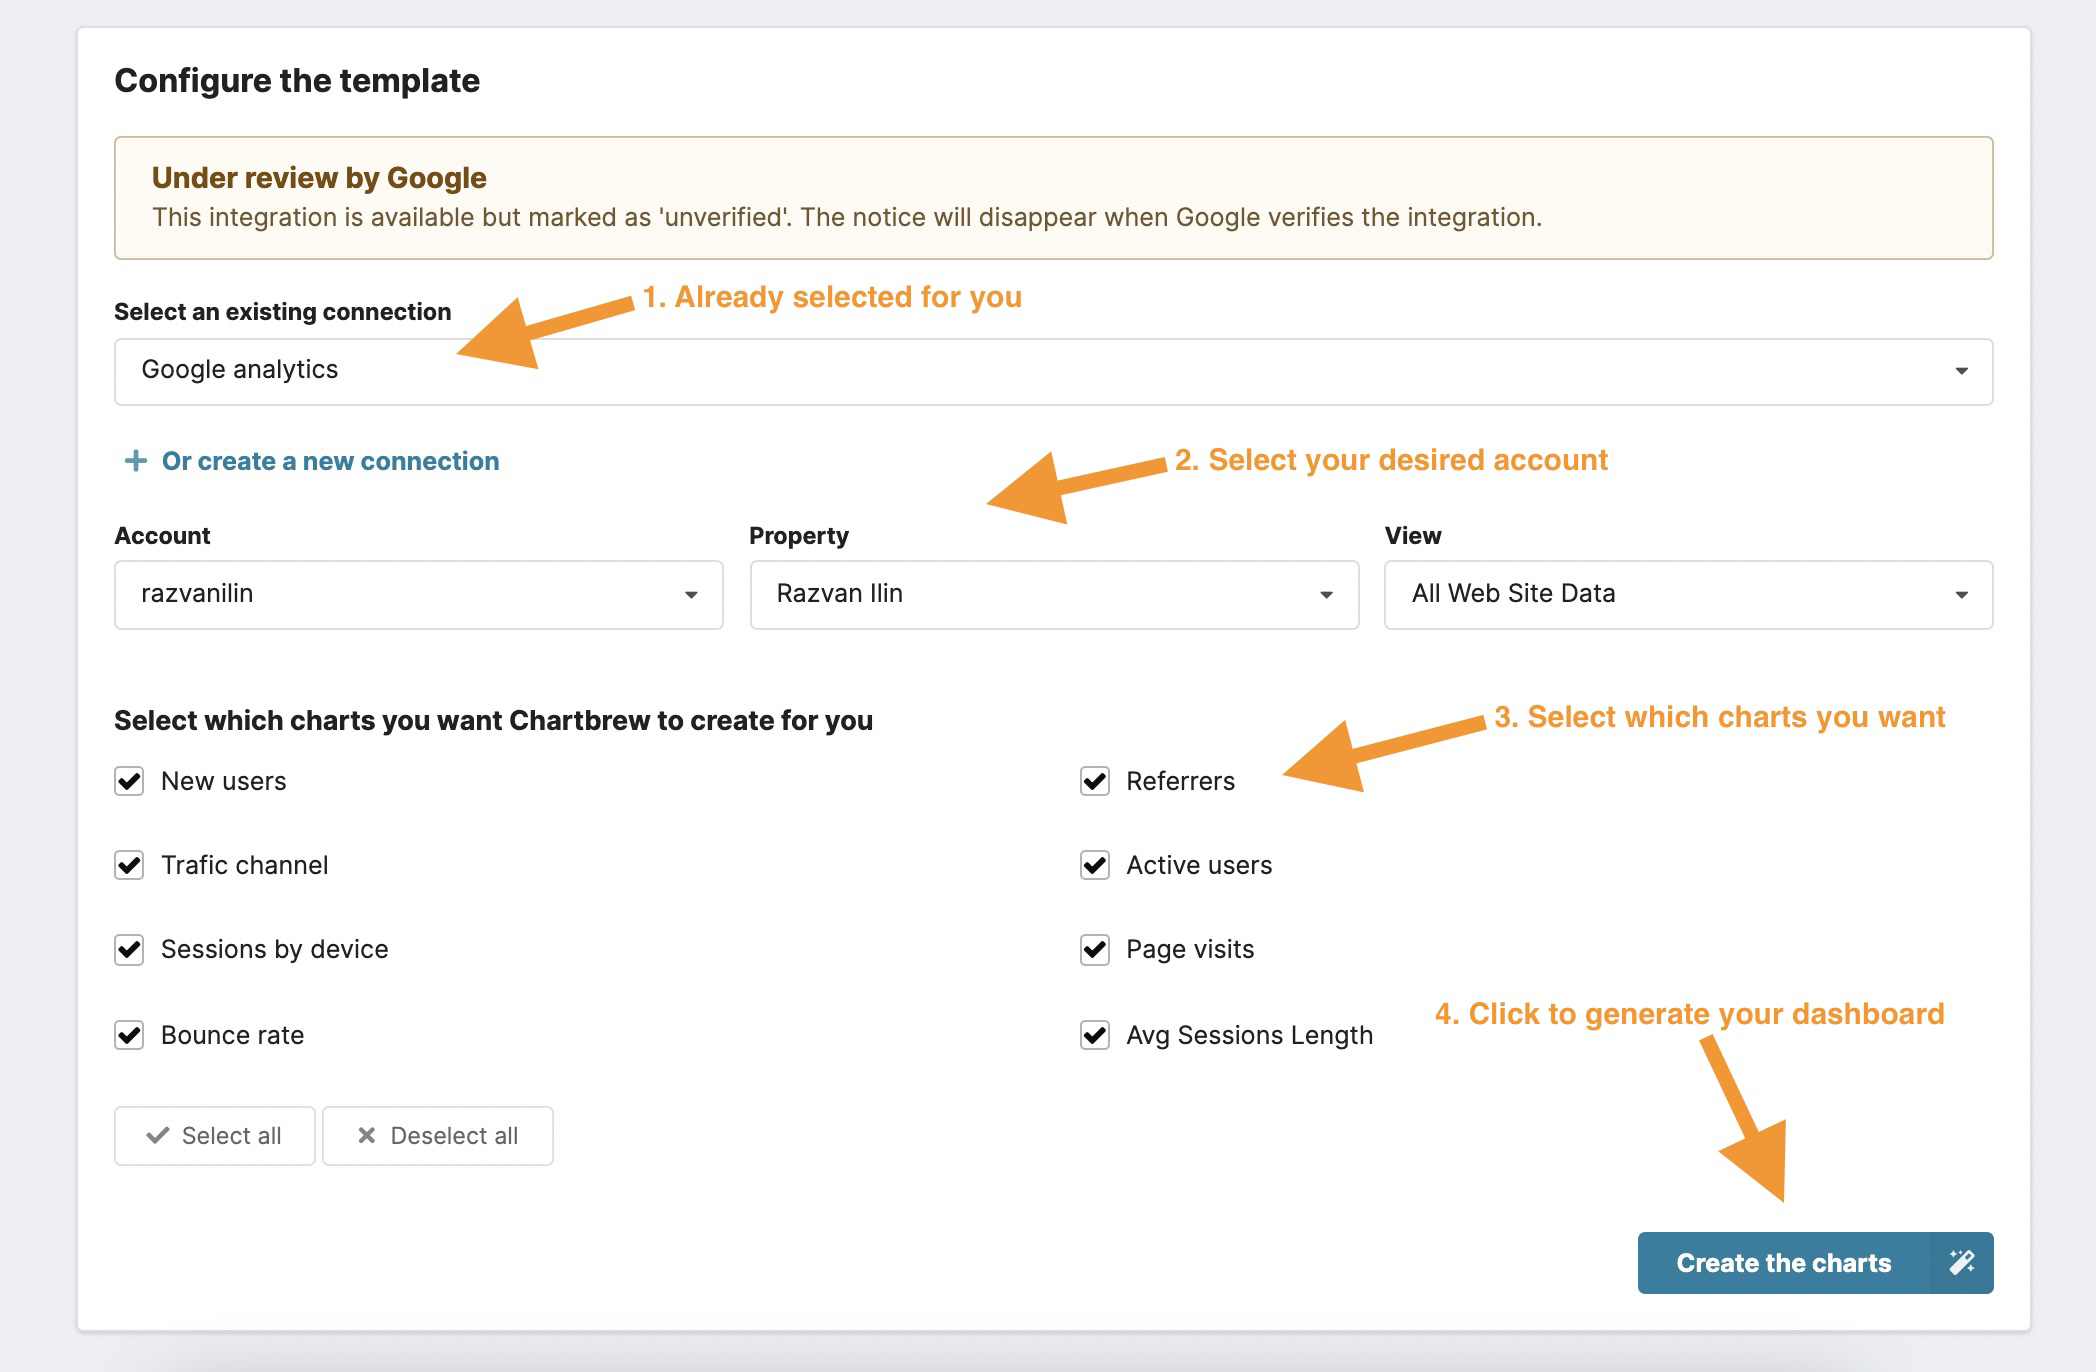 Google analytics template form in Chartbrew